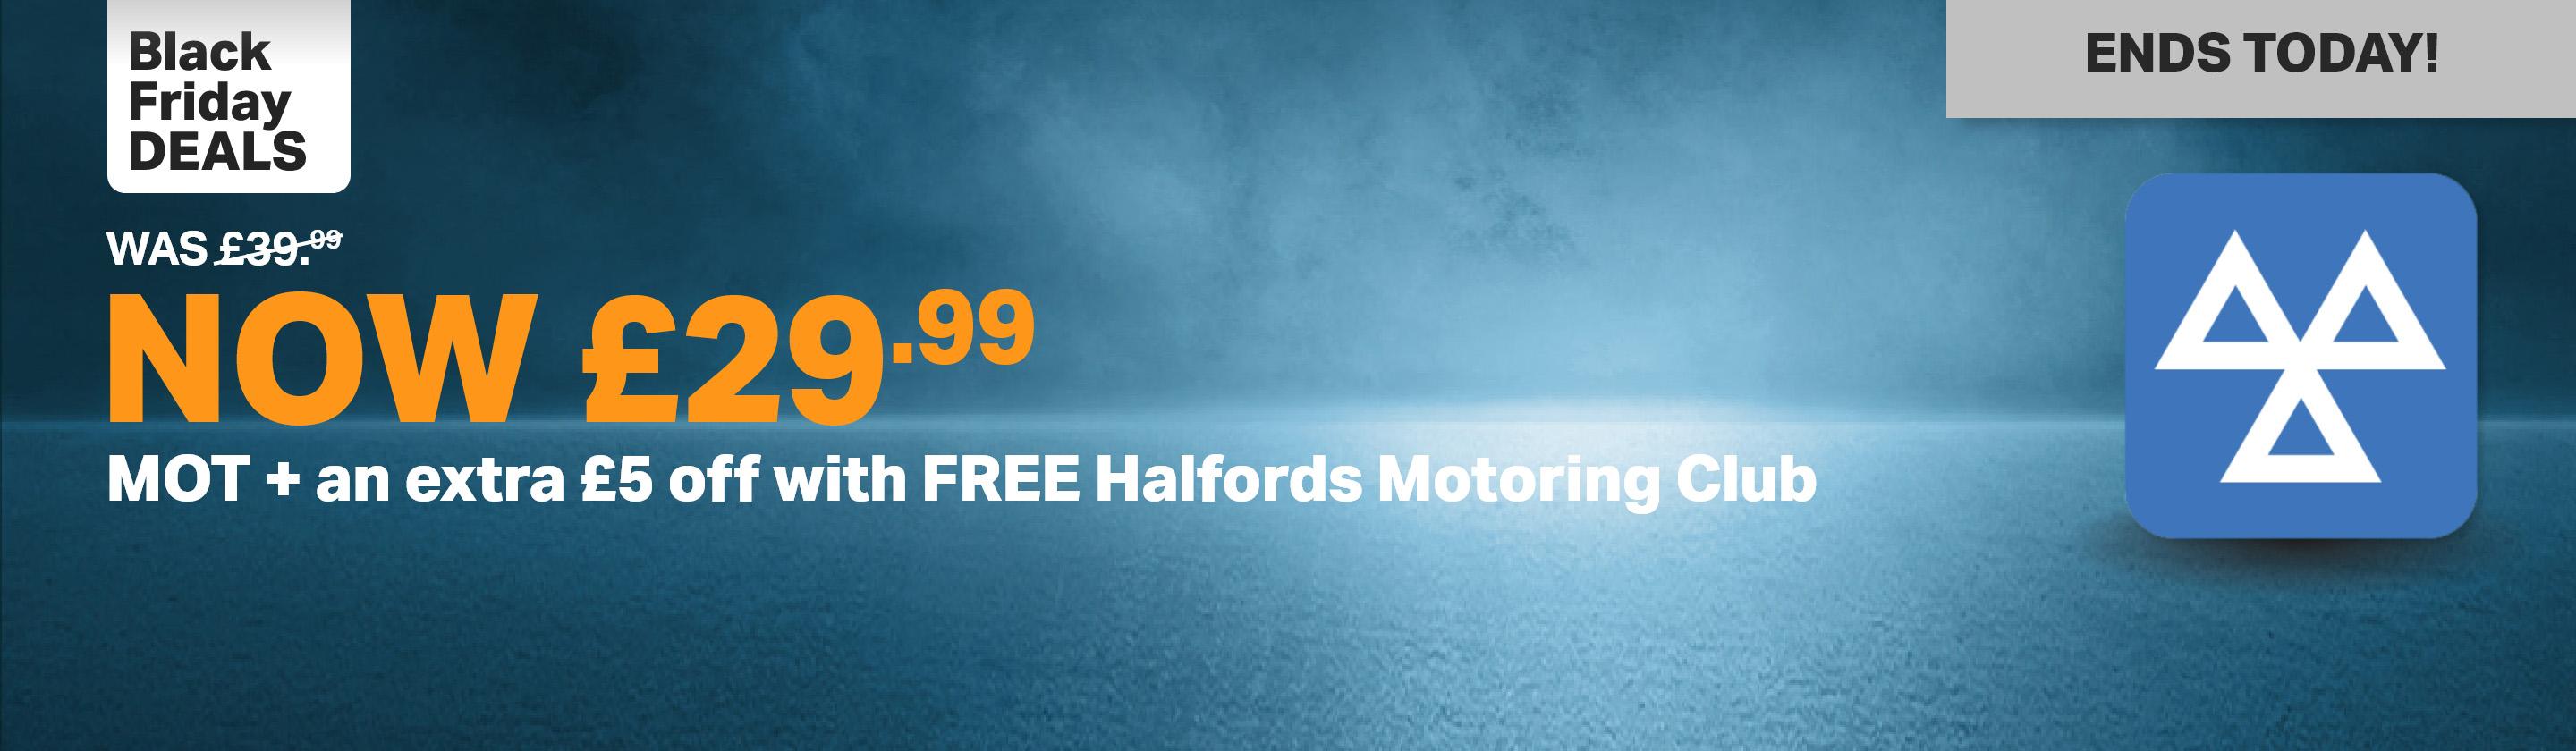 Black Friday Deals 
        Was £39.99 Now £29.99
        MOT
        Plus an extra £5 off with Free Halfords Motoring Club